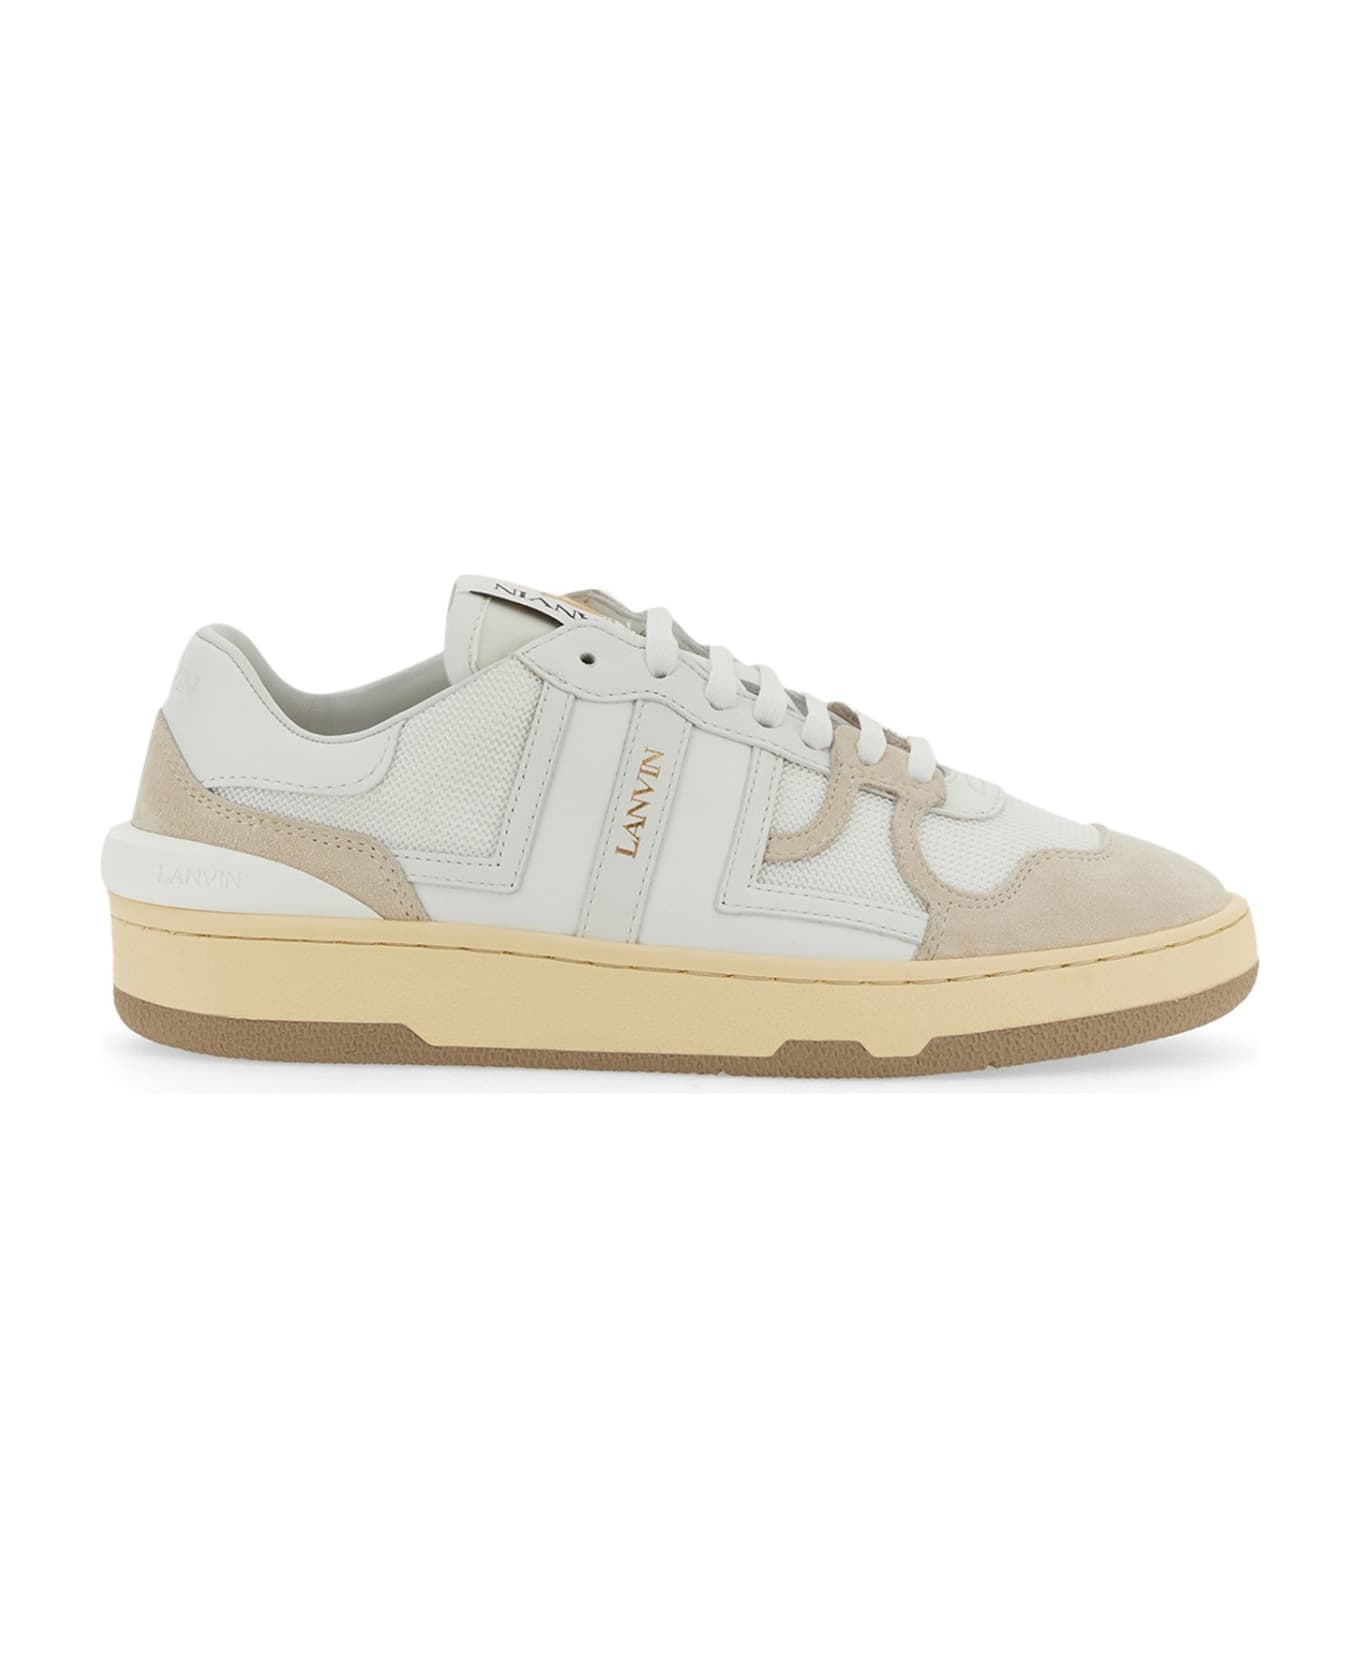 Lanvin Mesh, Suede And Nappa Leather Sneaker - White